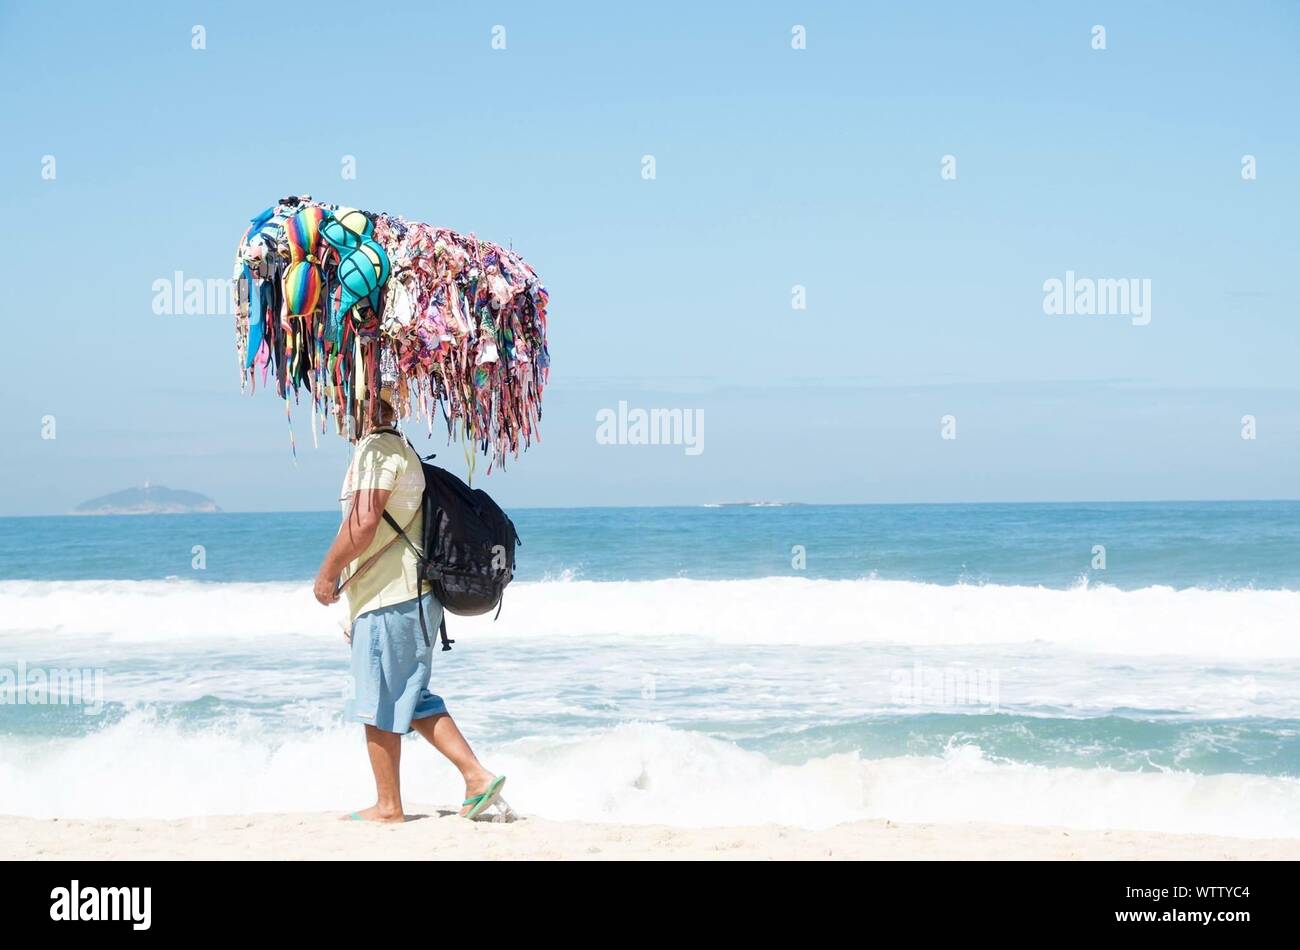 Side View Of Man Selling Bikinis On Shore At Beach Stock Photo